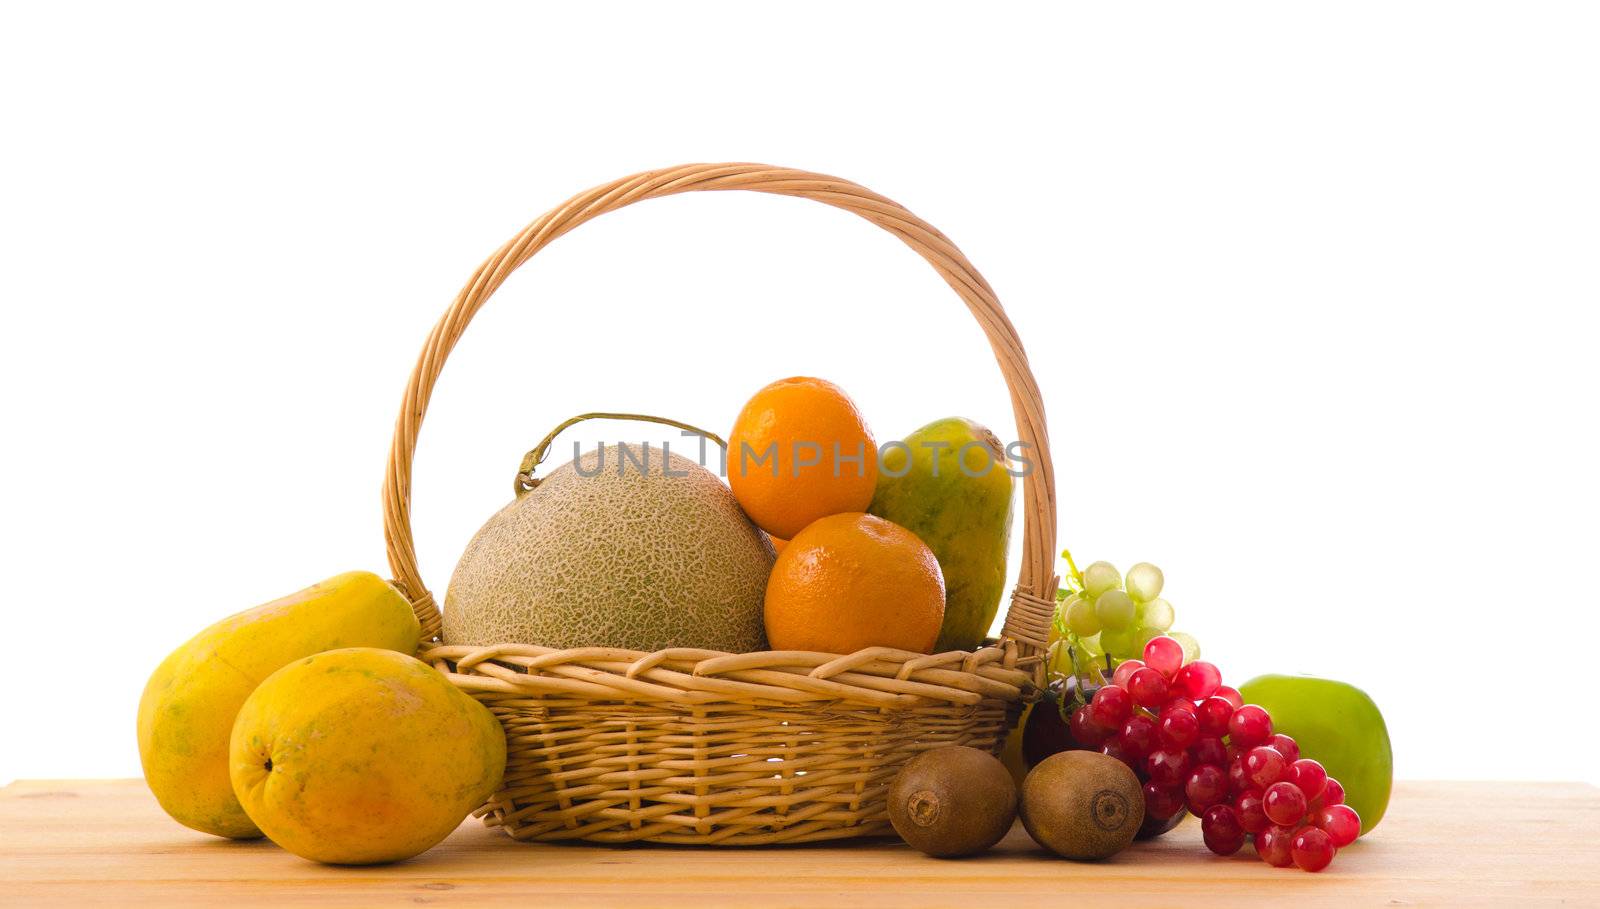 group on fruits on basket by yuliang11